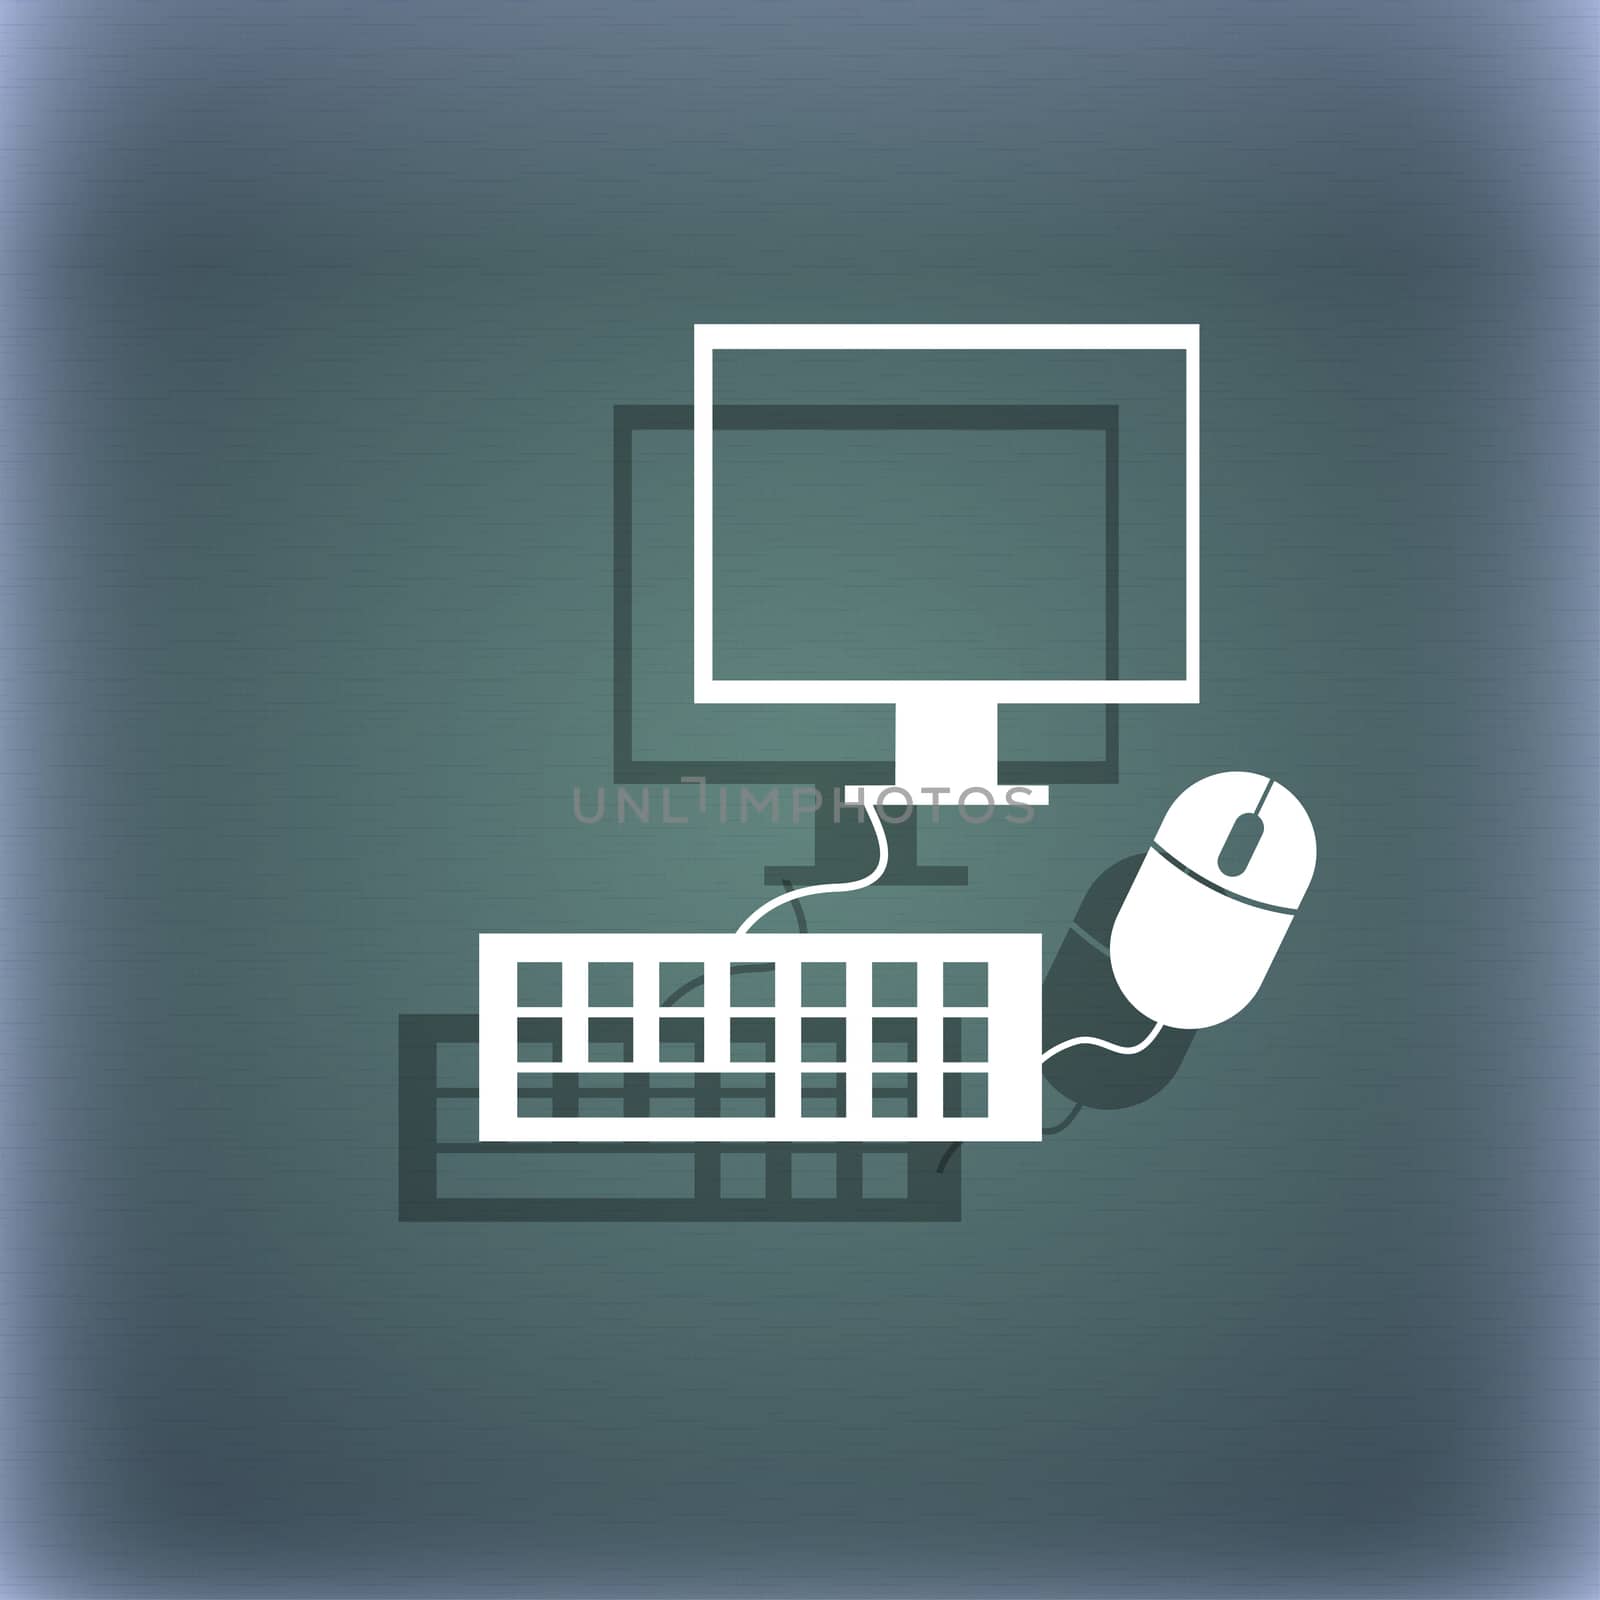 Computer widescreen monitor, keyboard, mouse sign icon. On the blue-green abstract background with shadow and space for your text.  by serhii_lohvyniuk